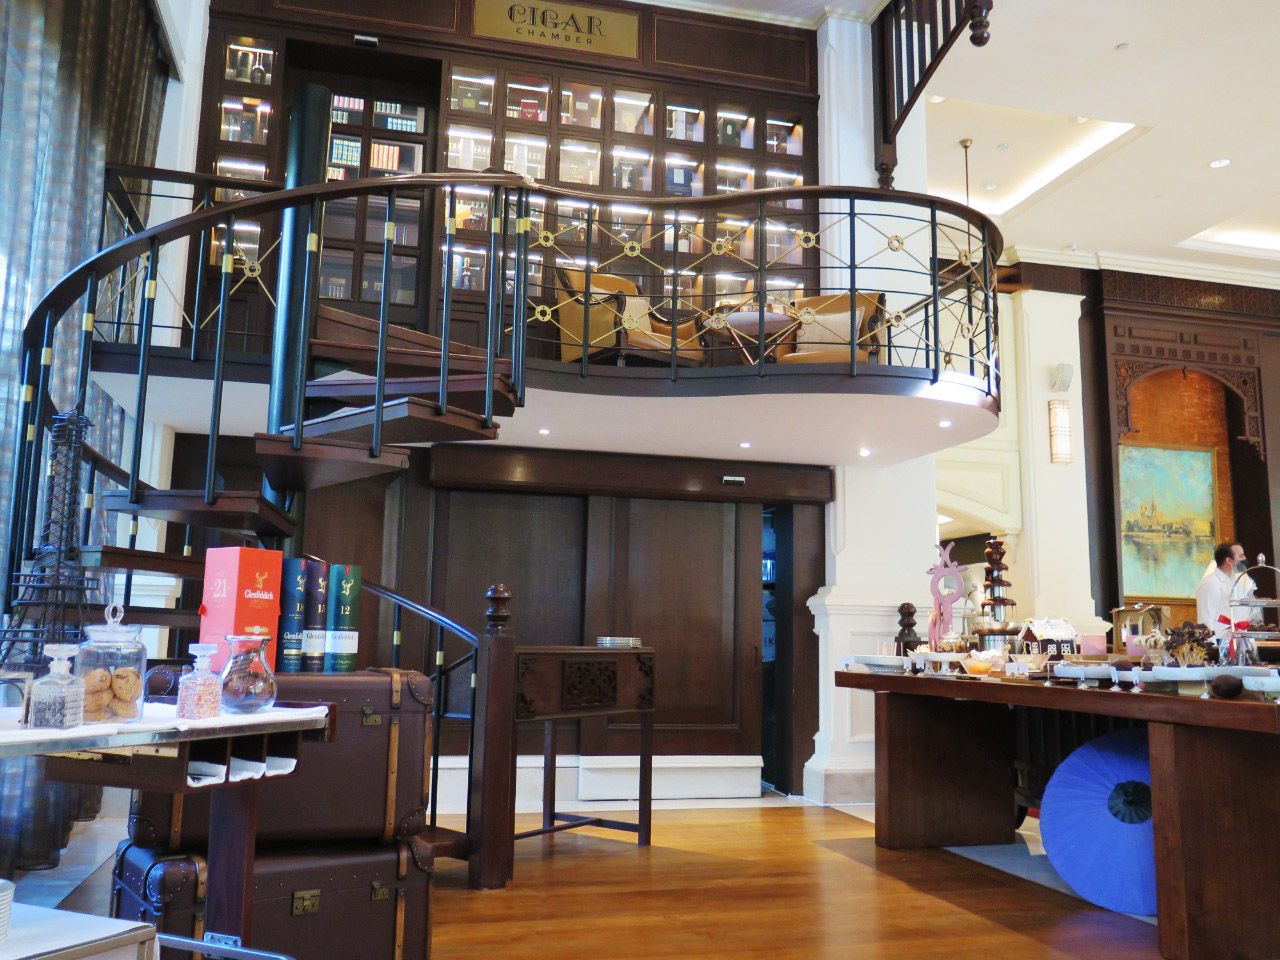 Phnom Penh: All About Chocolate at Sofitel - Afternoon Tea for Chocolate Lovers